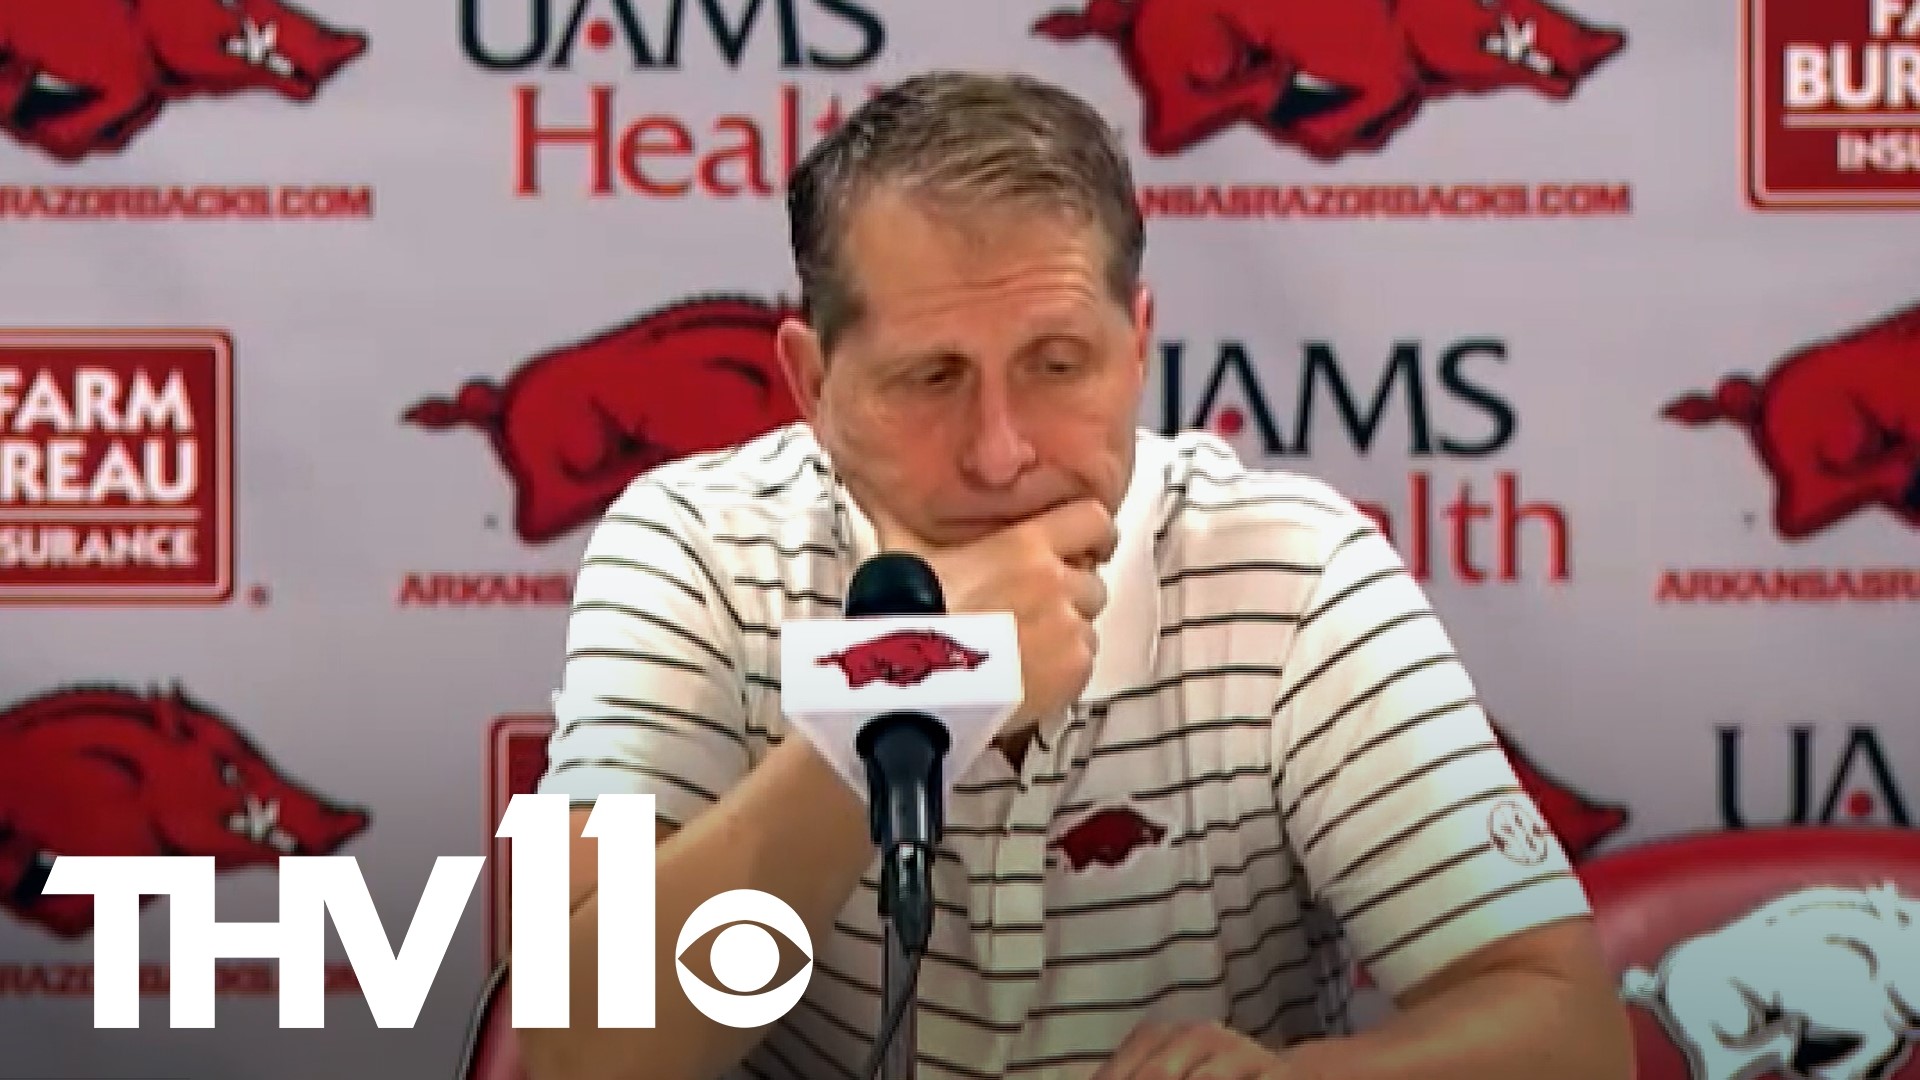 Arkansas is now 6-6 in the SEC after a 70-64 loss to Mississippi State at Bud Walton Arena.